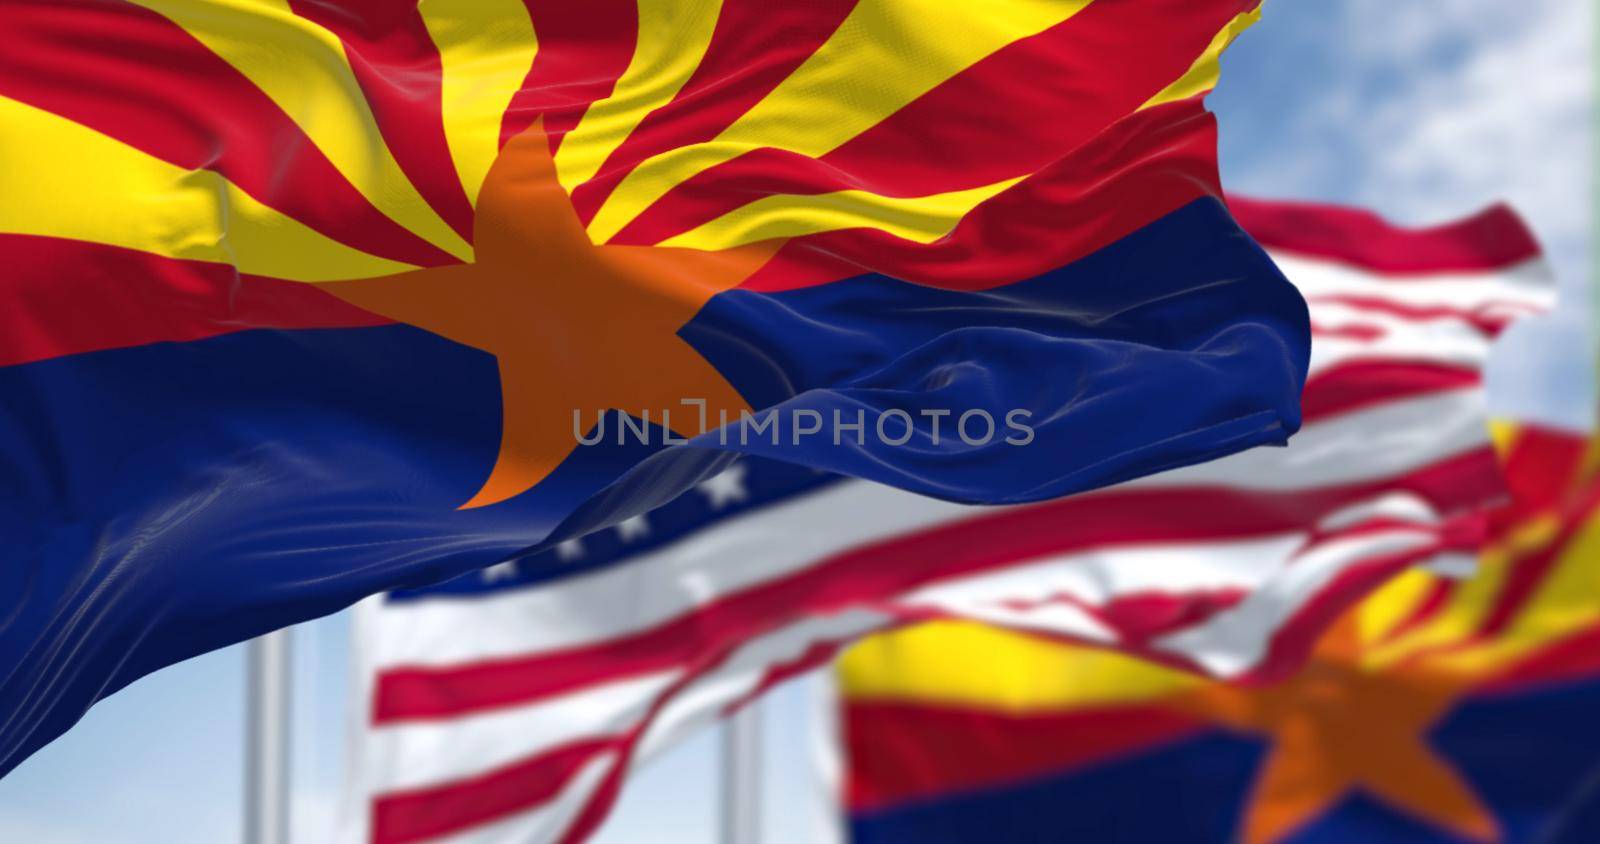 The flags of the Arizona state and United States waving in the wind. is a state in the Western United States. Democracy and independence. American state.